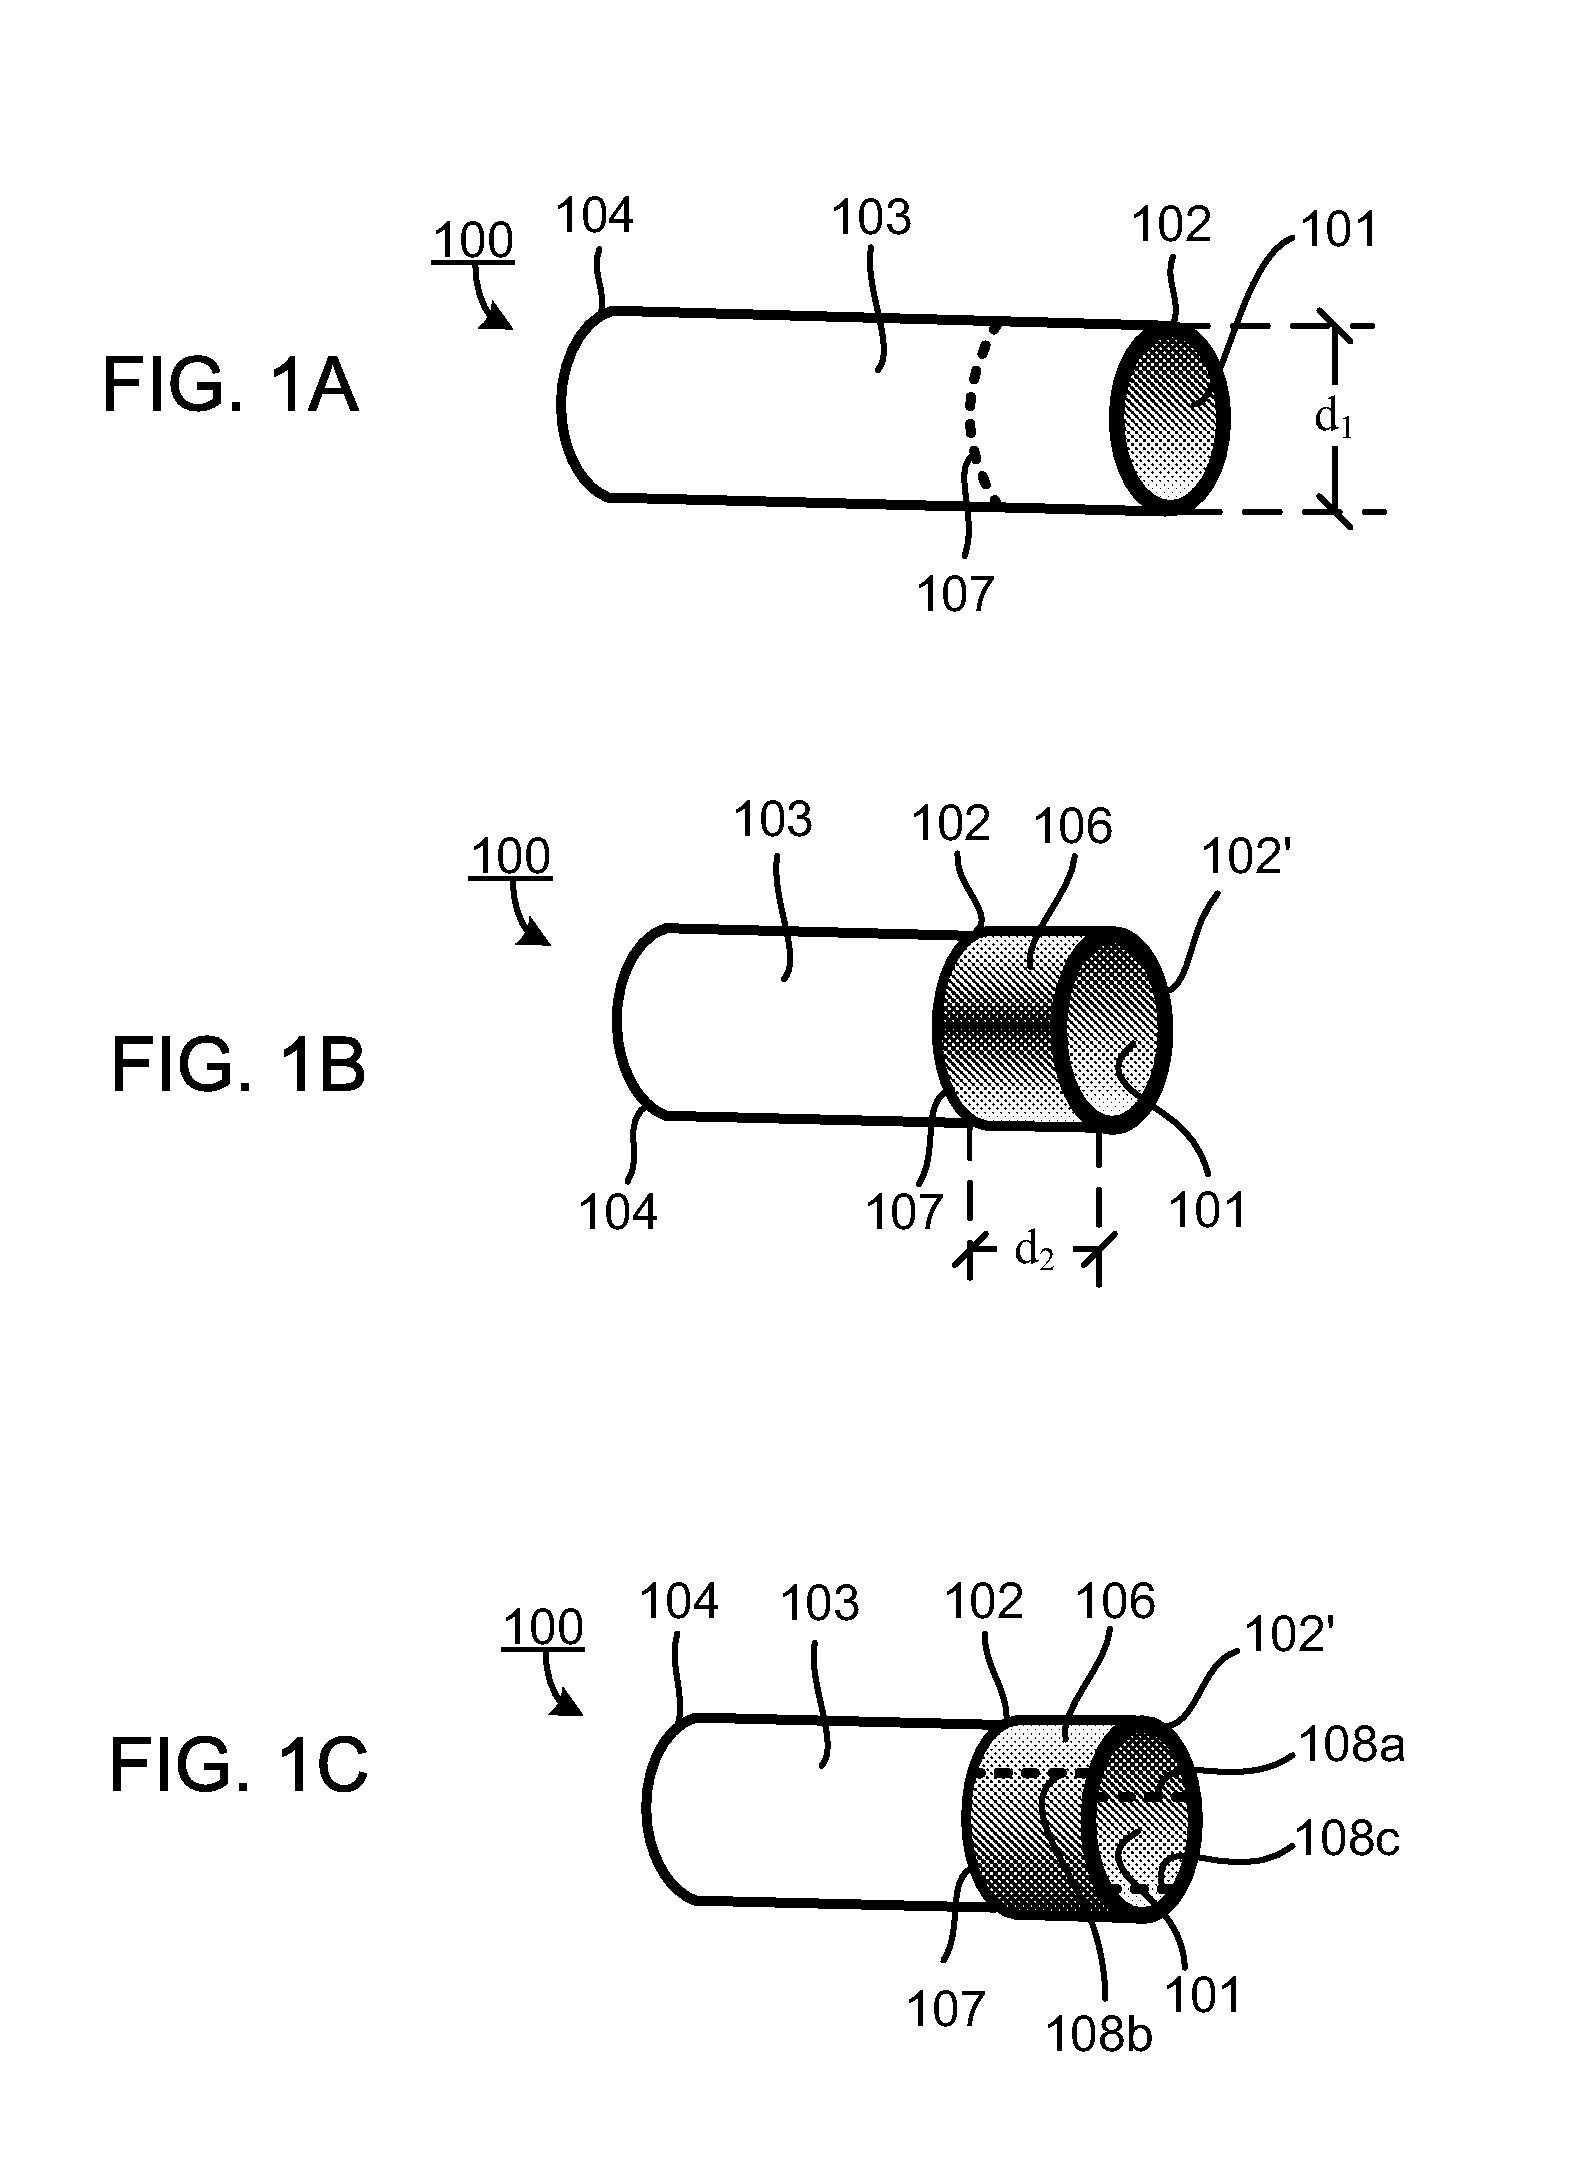 Replacement heart valve, valve holder and methods of making and using same